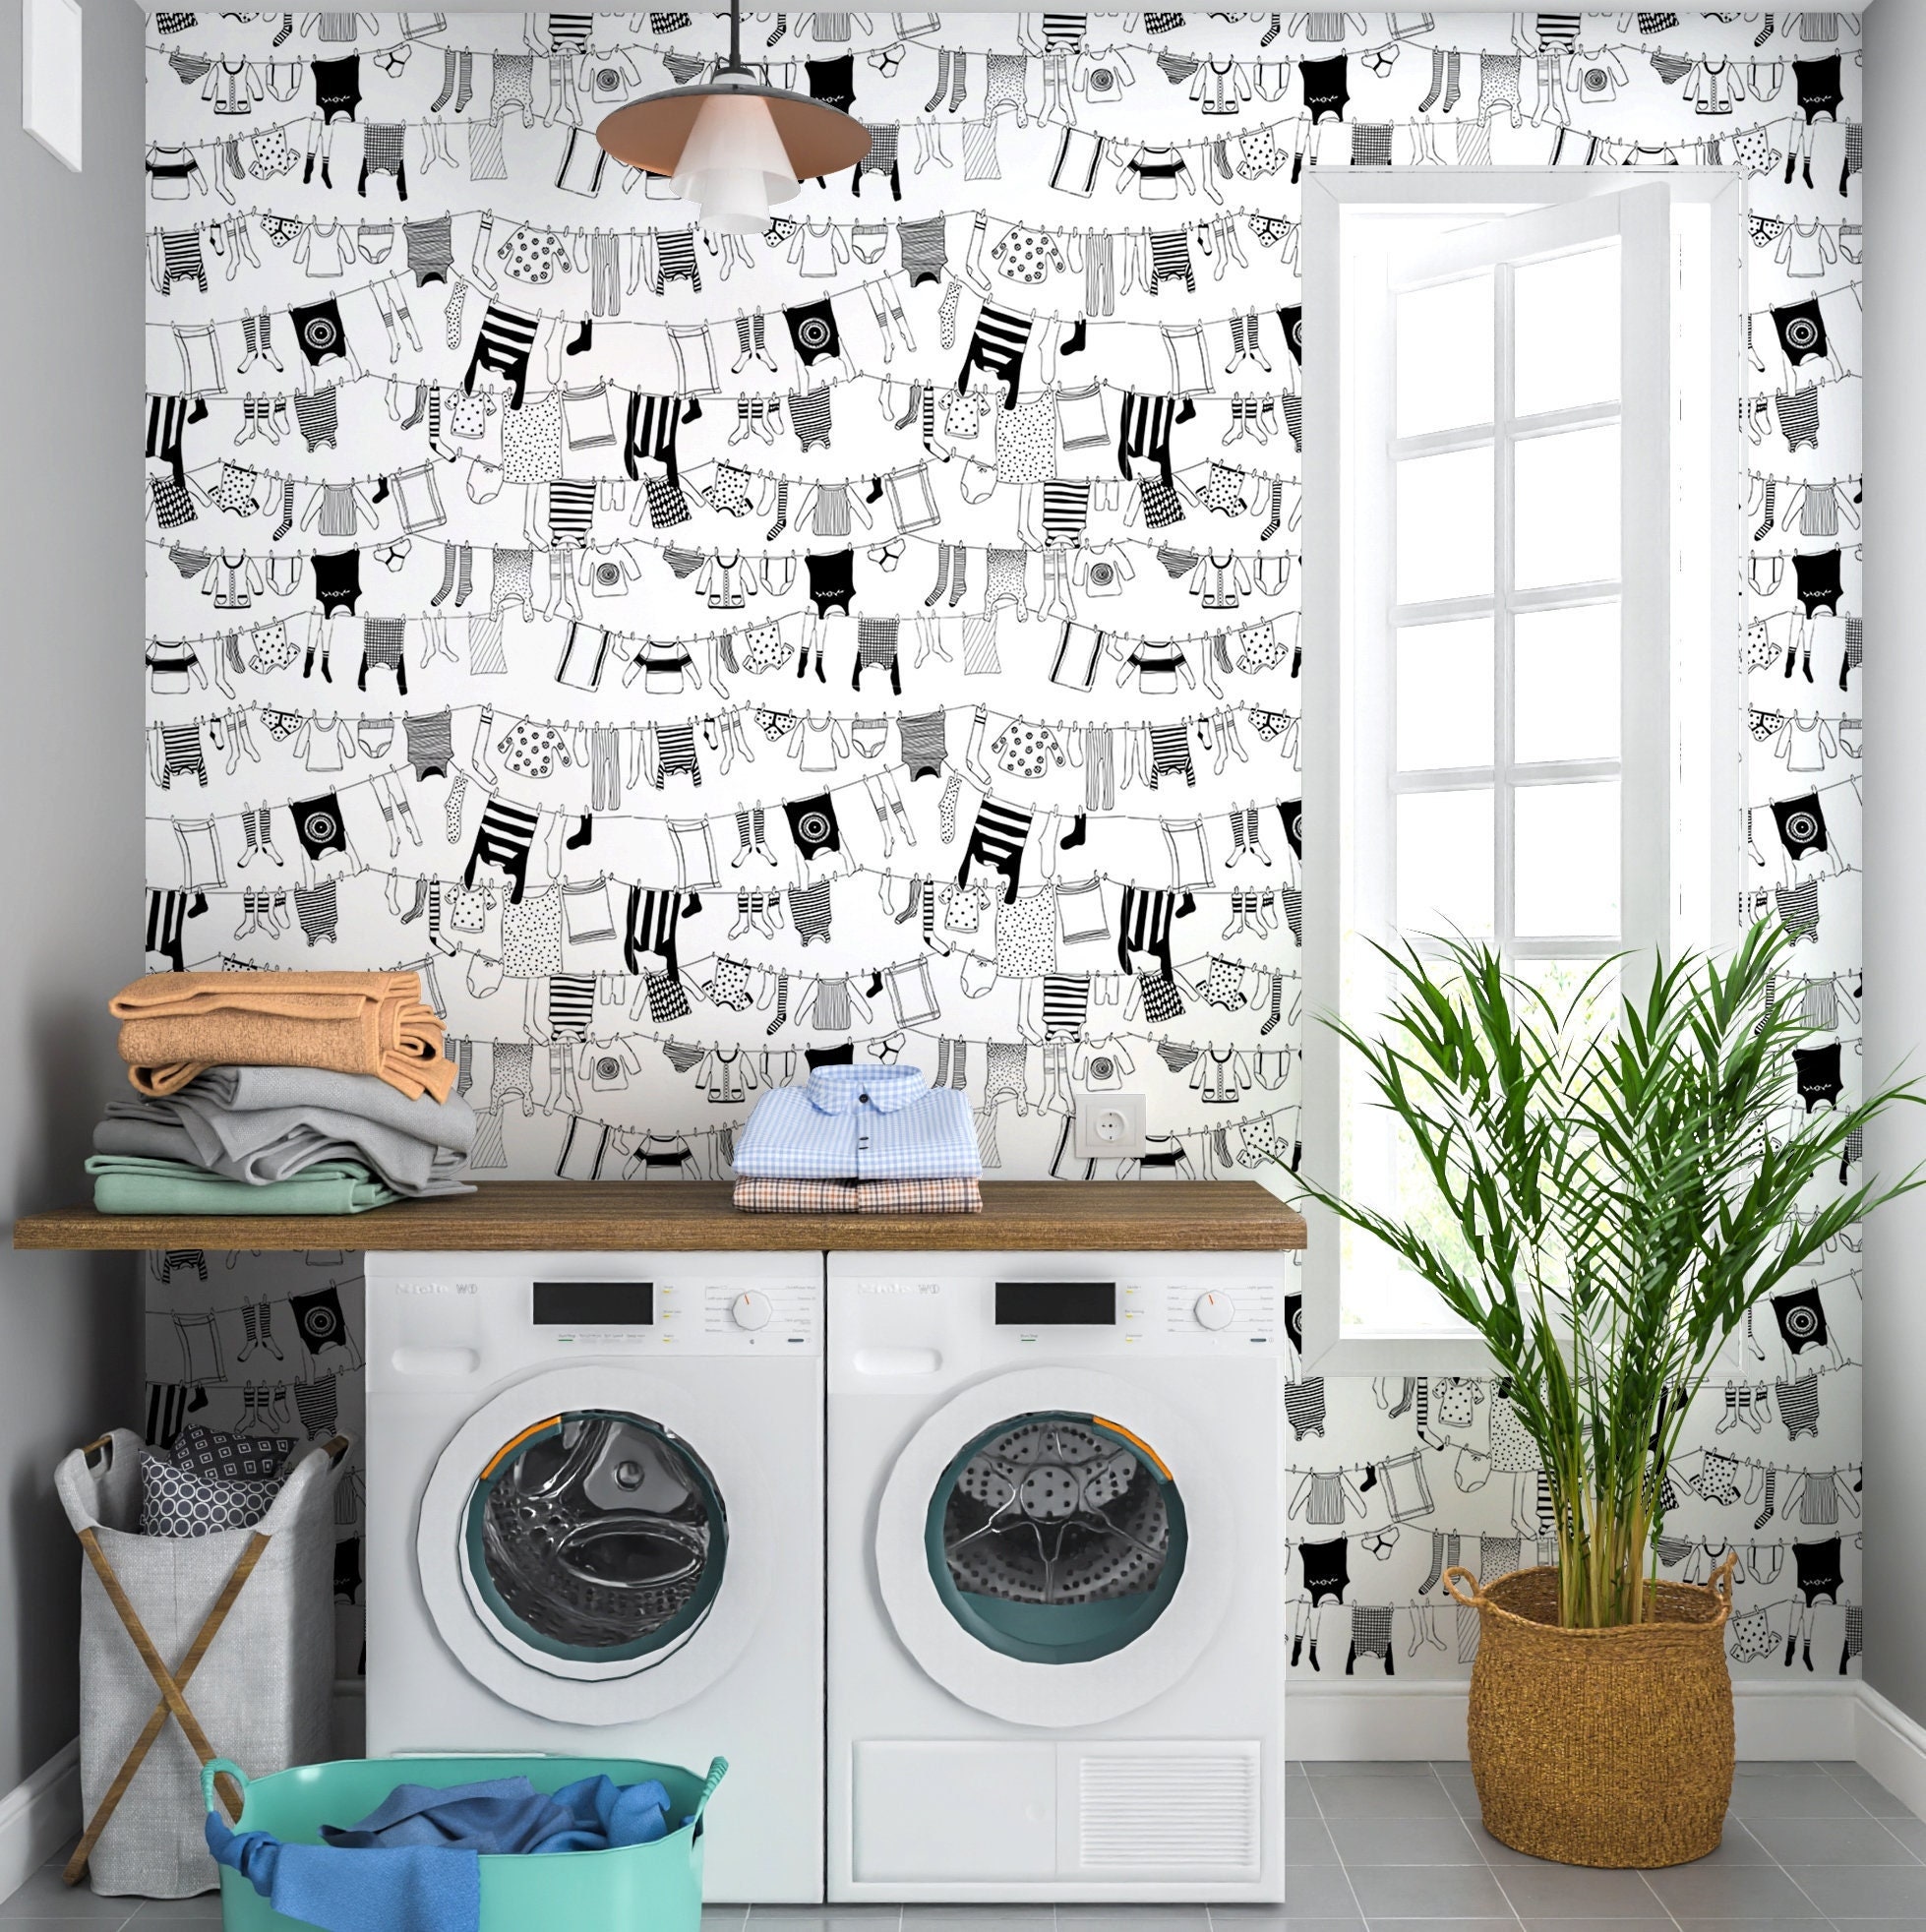 10 Laundry Room Decor Ideas For Style and Function